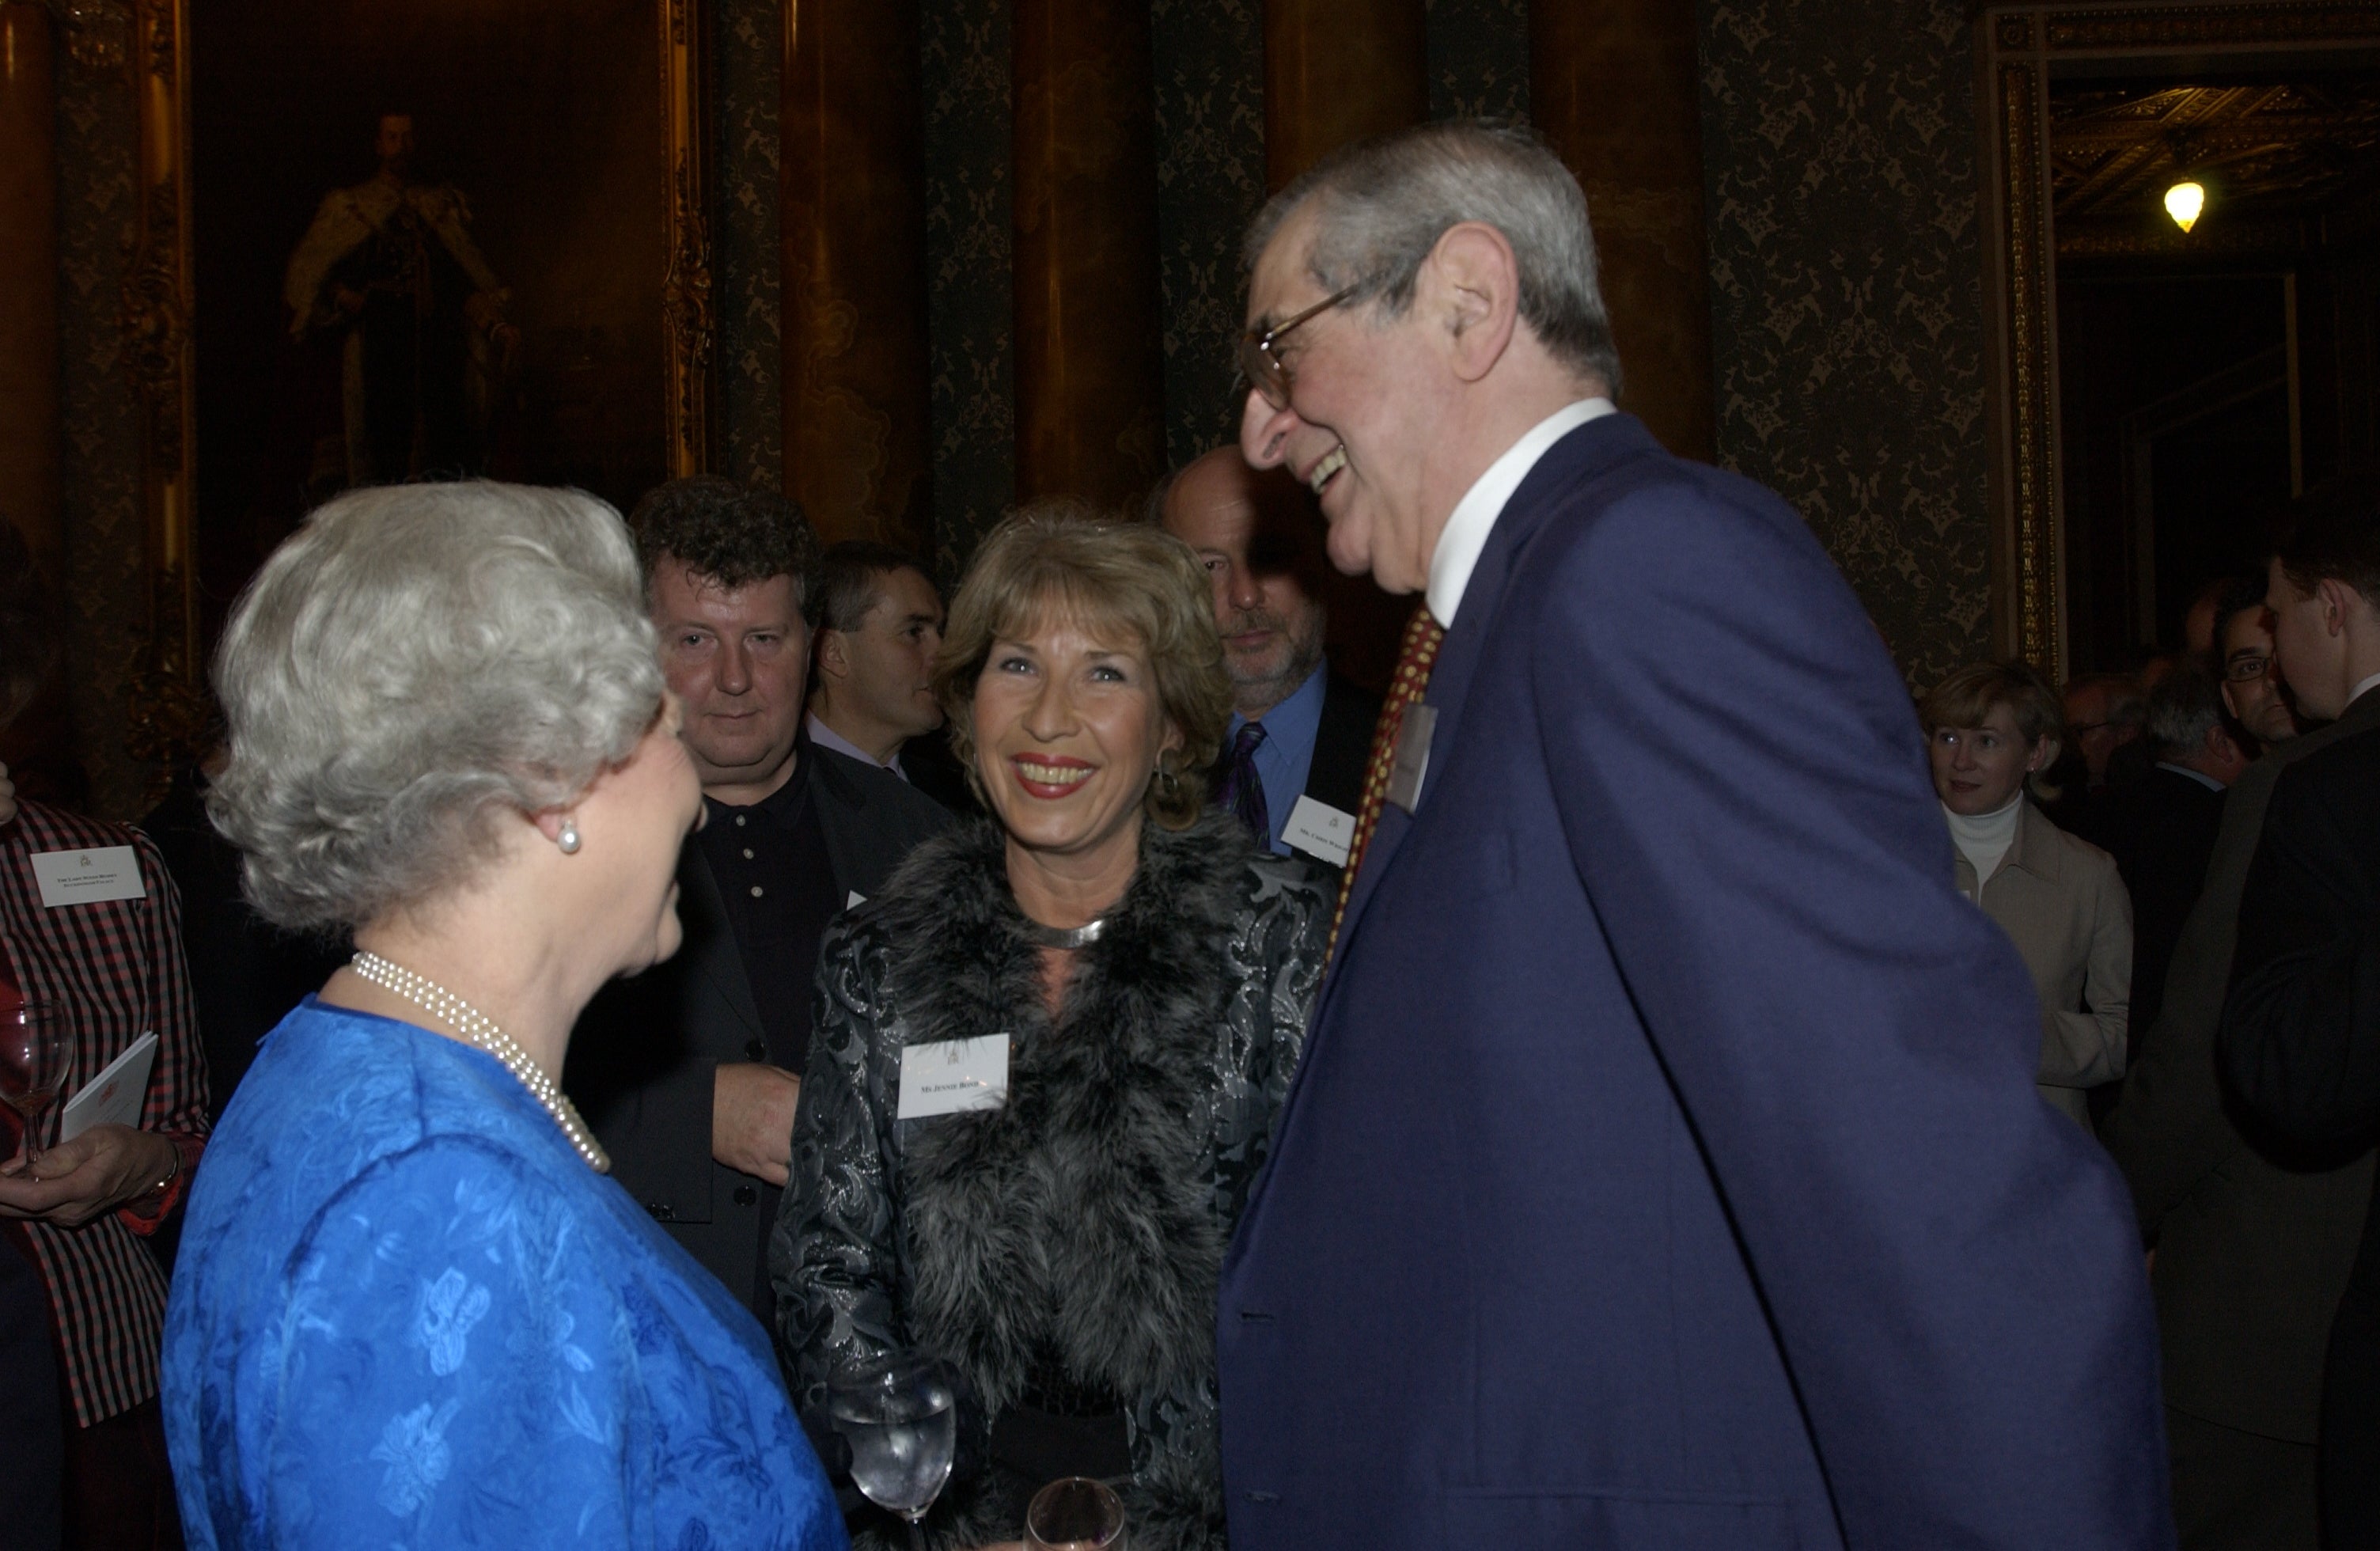 The Queen with Jennie Bond and Denis Norden at a 2001 reception in Buckingham Palace